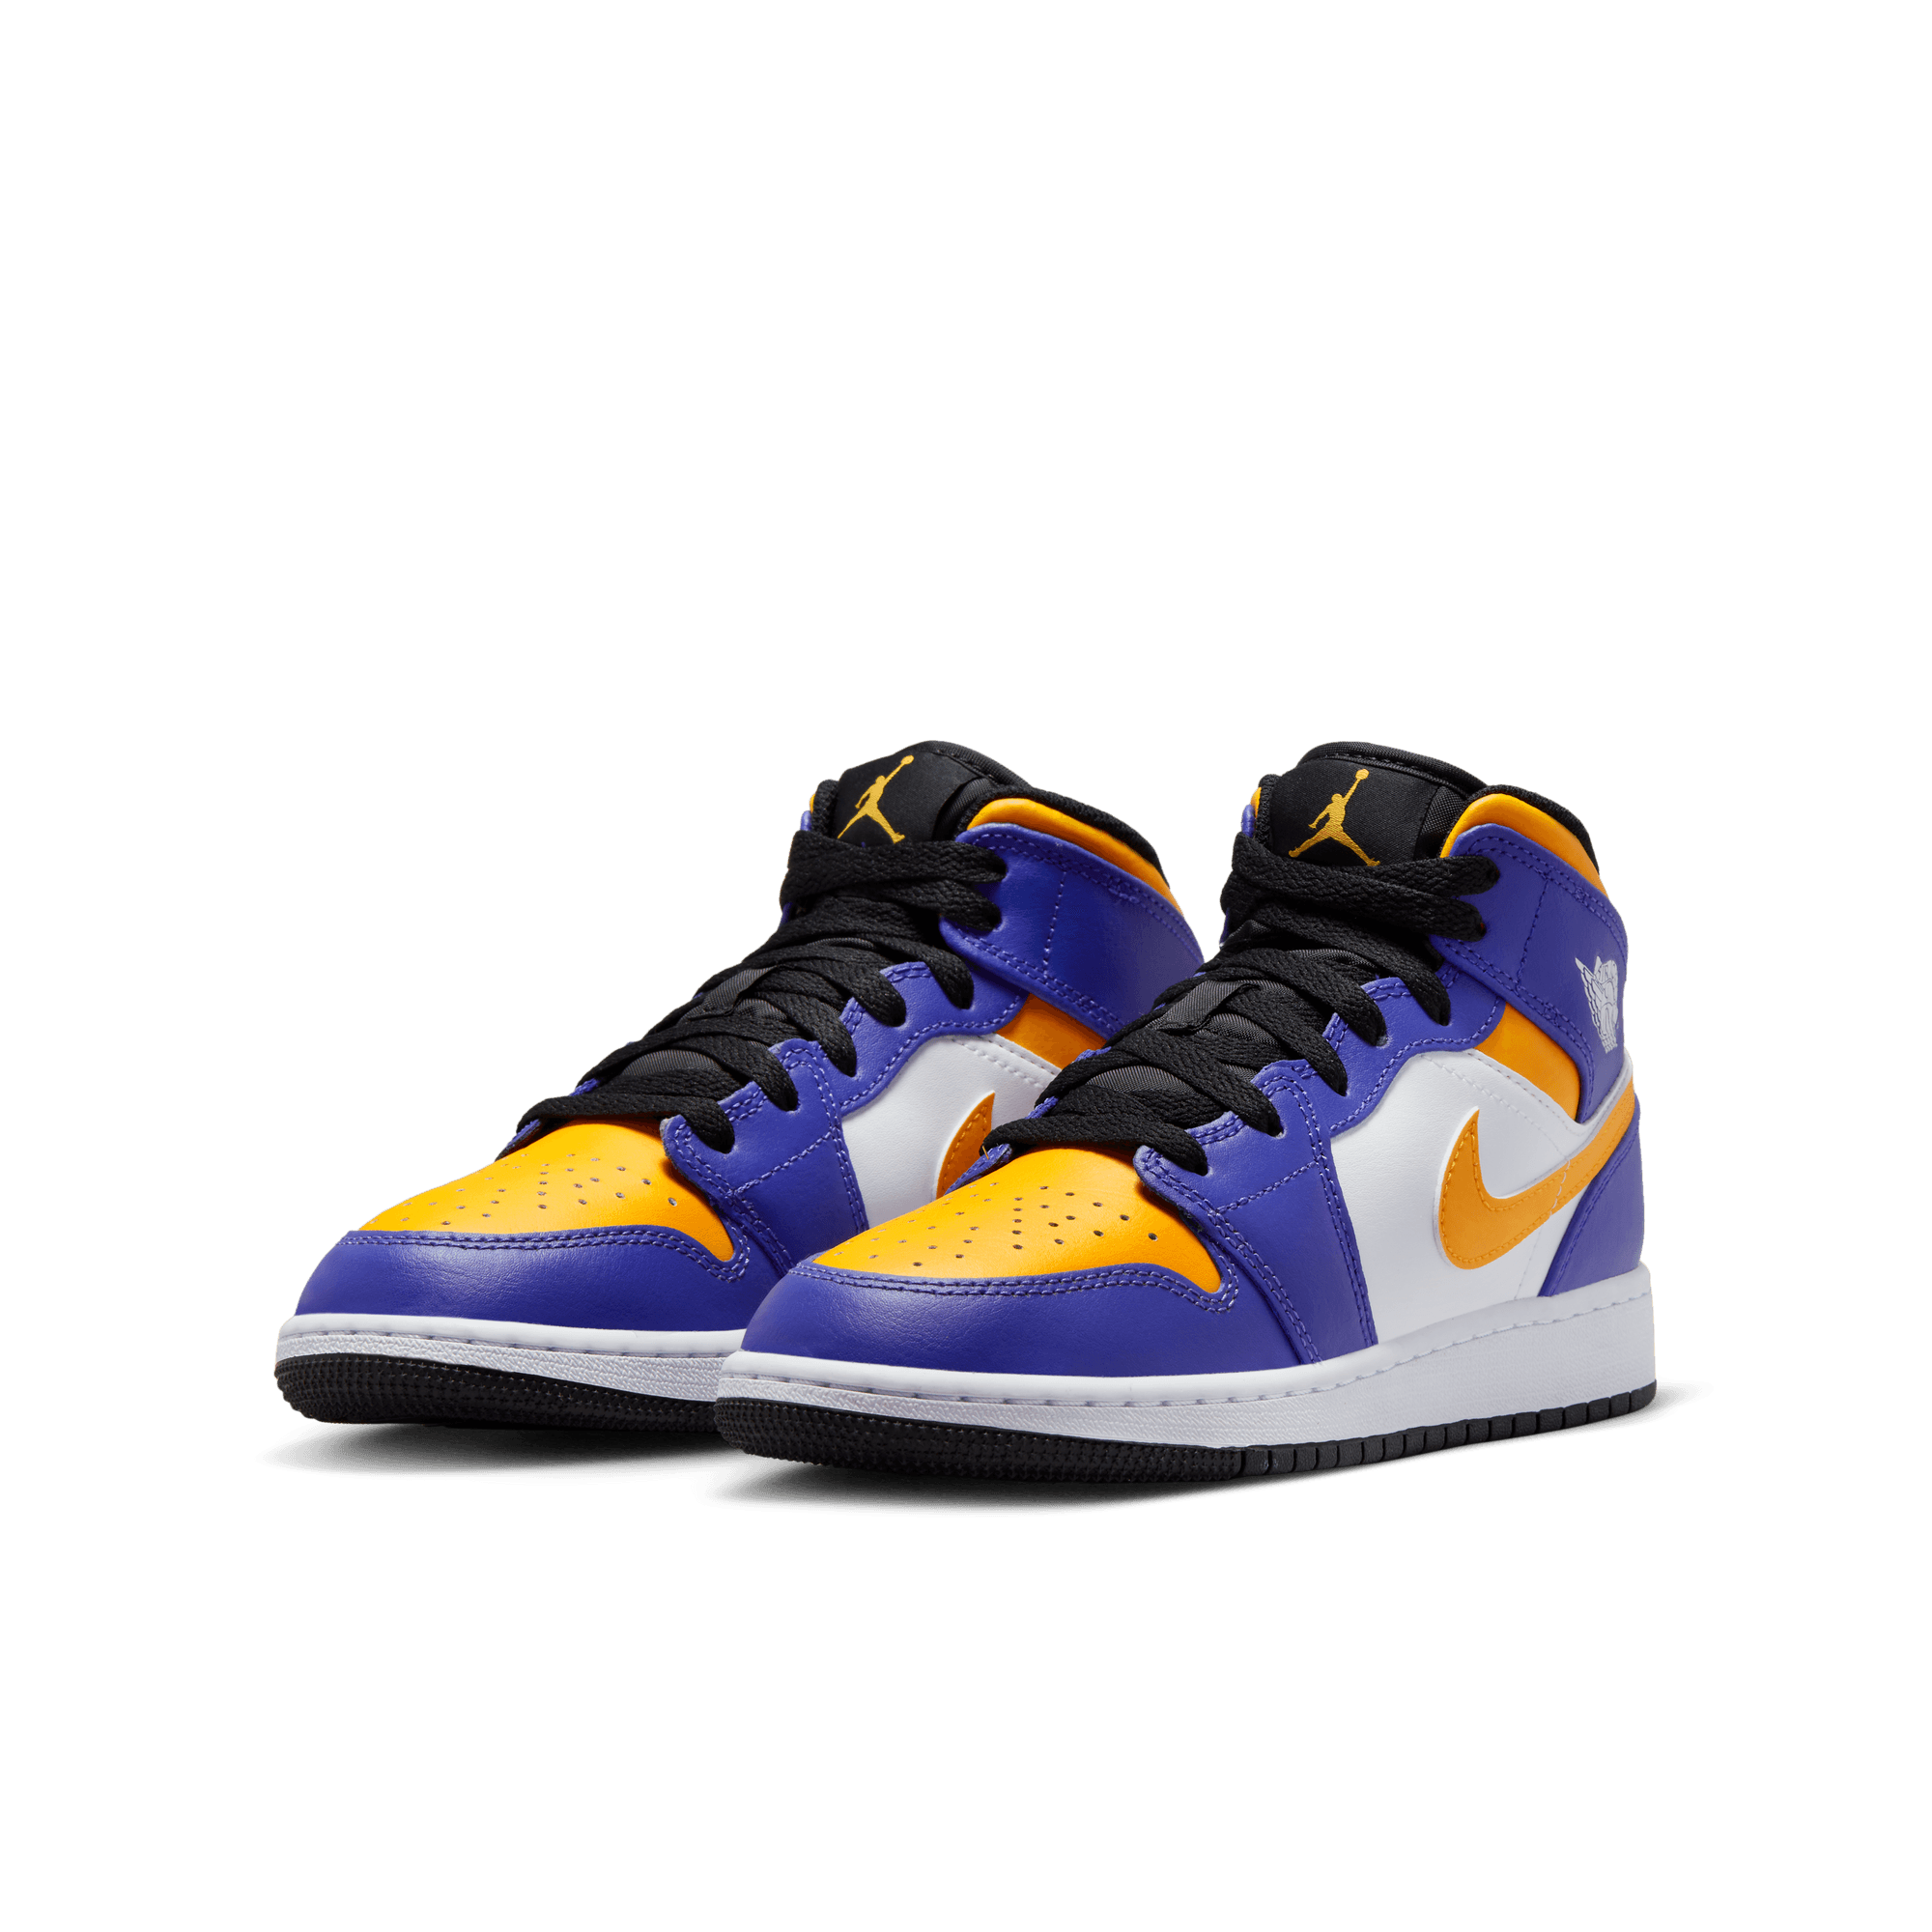 Where to buy Air Jordan 1 Mid Lakers? Everything we know so far